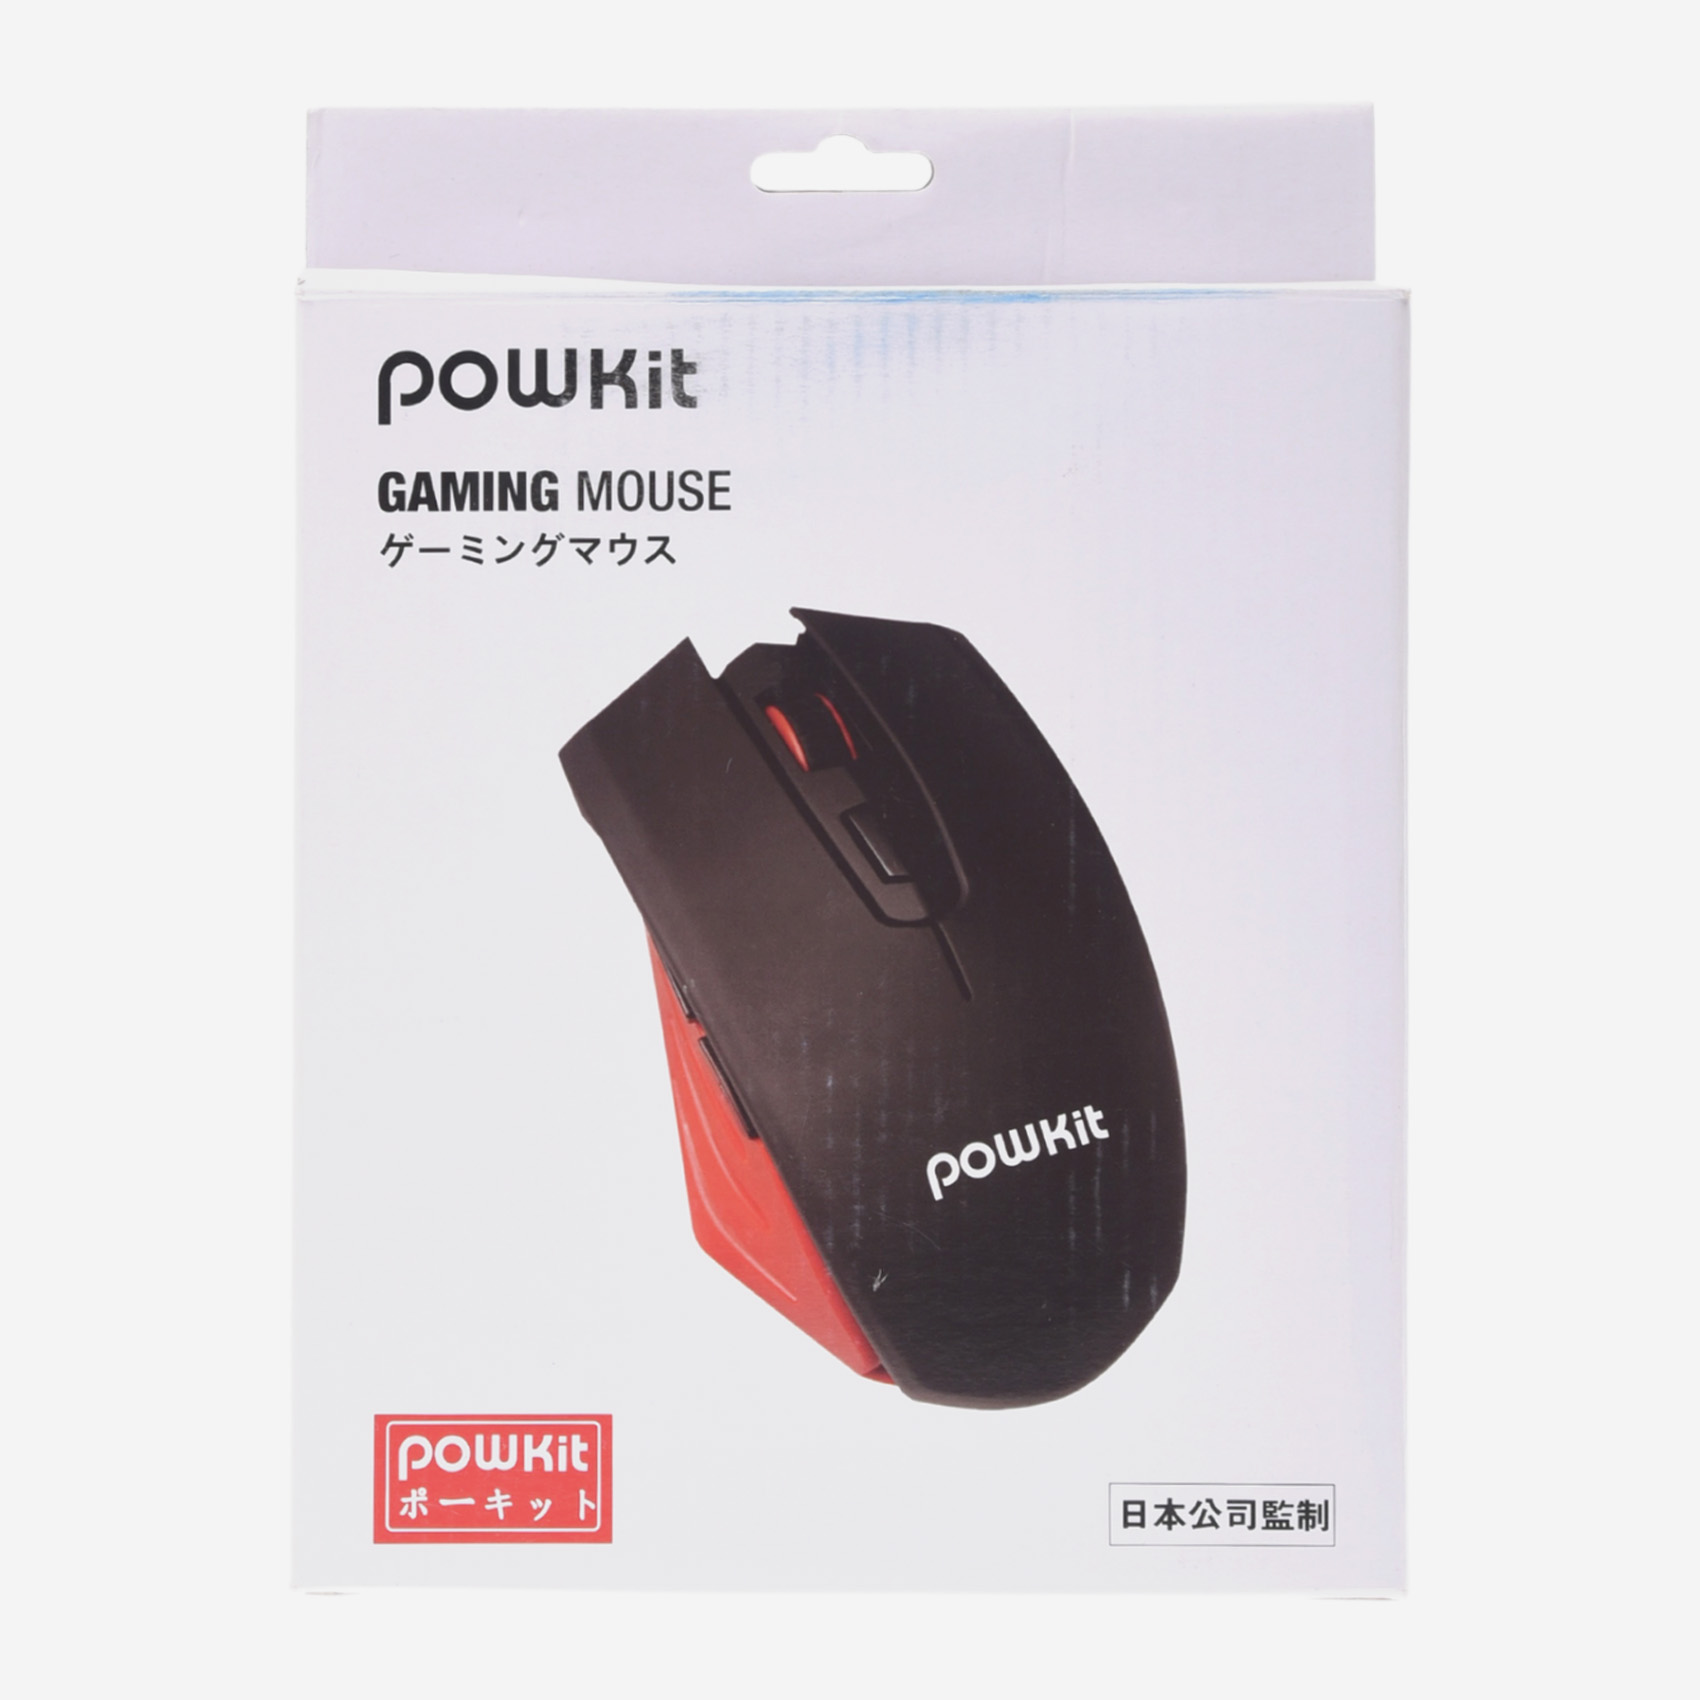 POWERKIT Gaming Mouse